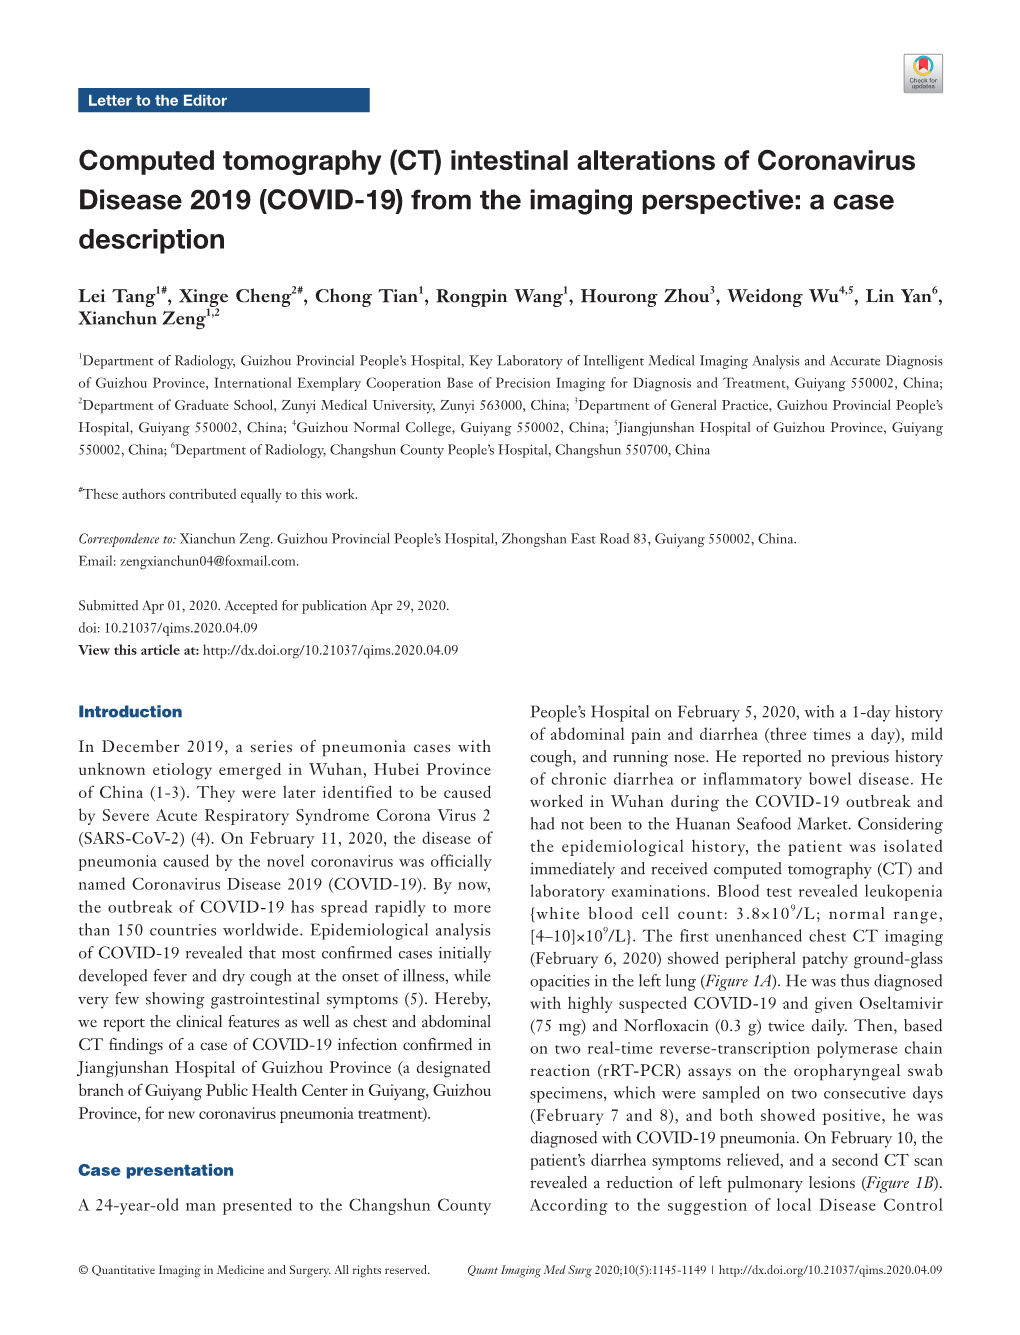 Intestinal Alterations of Coronavirus Disease 2019 (COVID-19) from the Imaging Perspective: a Case Description